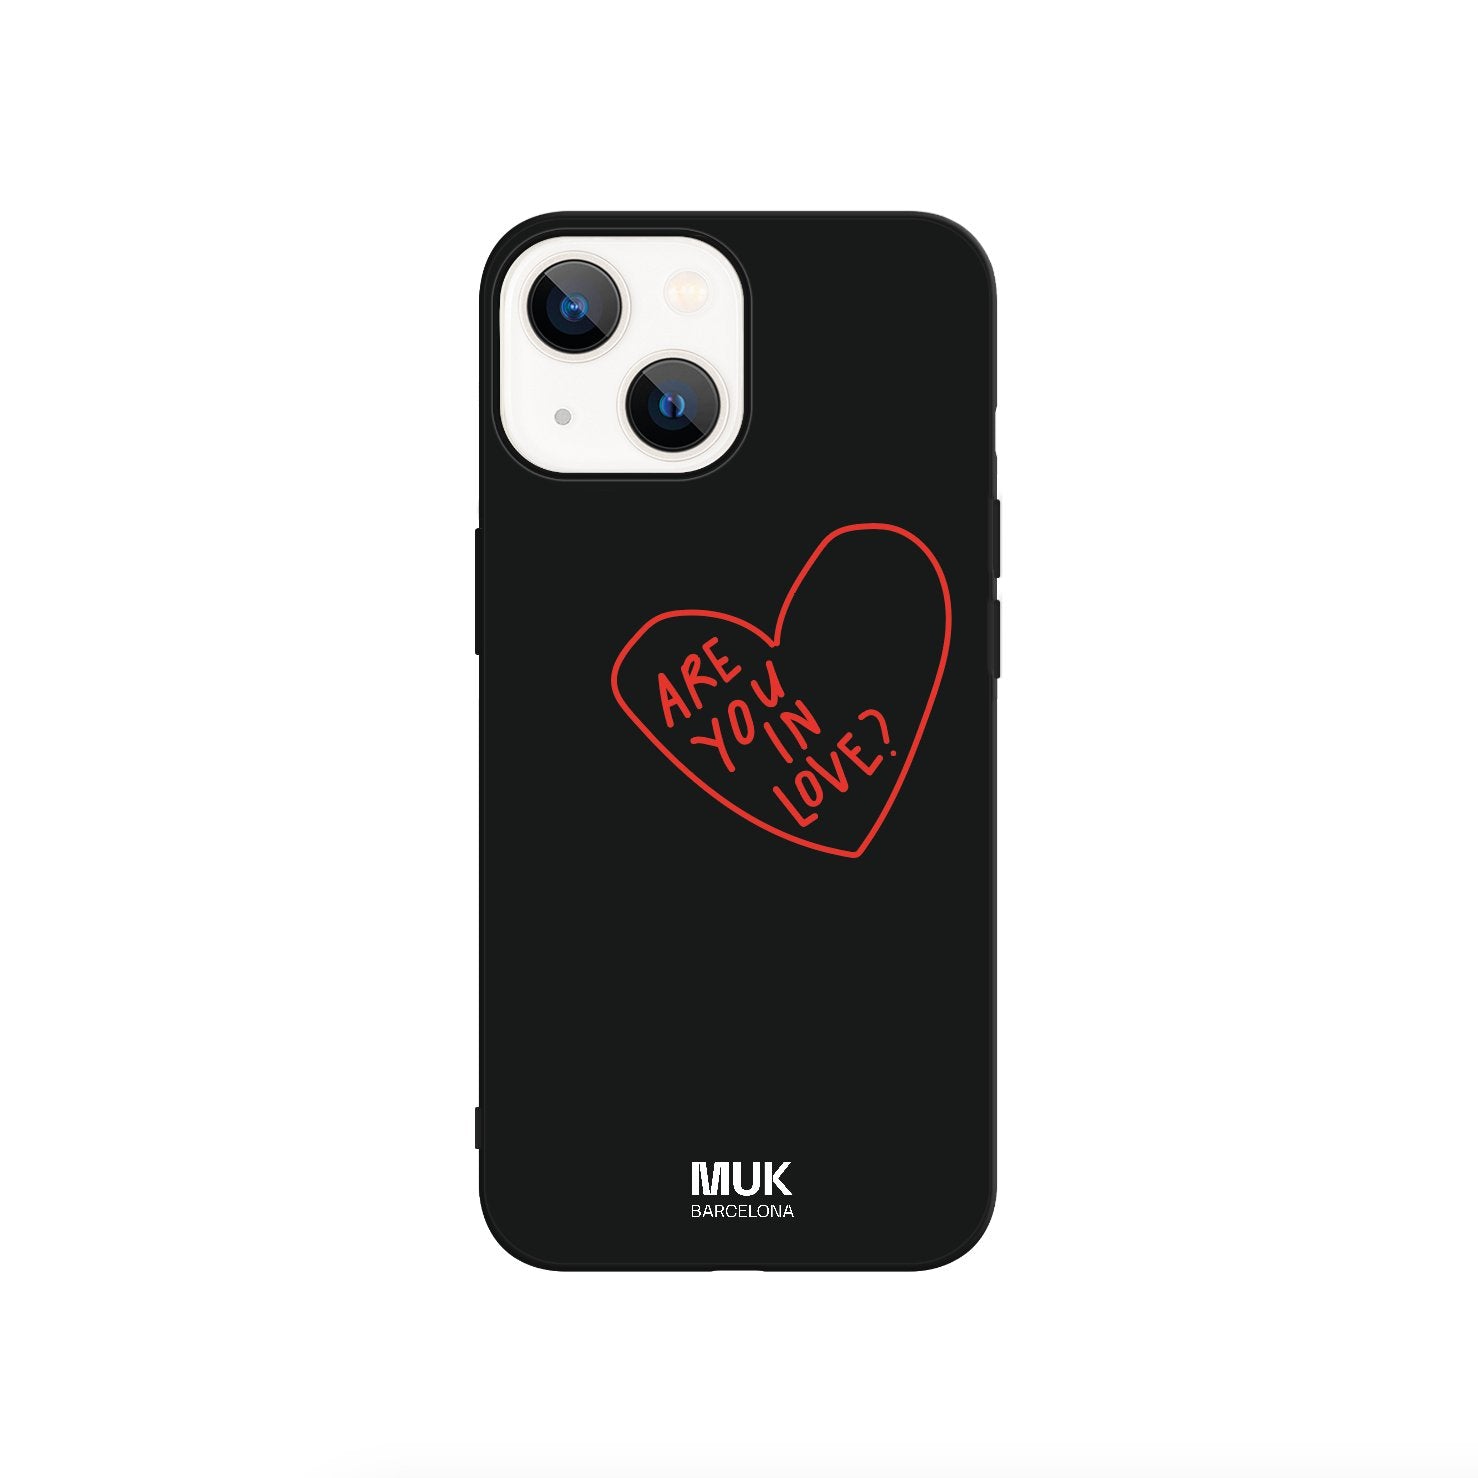 Black TPU phone case with red heart and text "Are you in love?"
